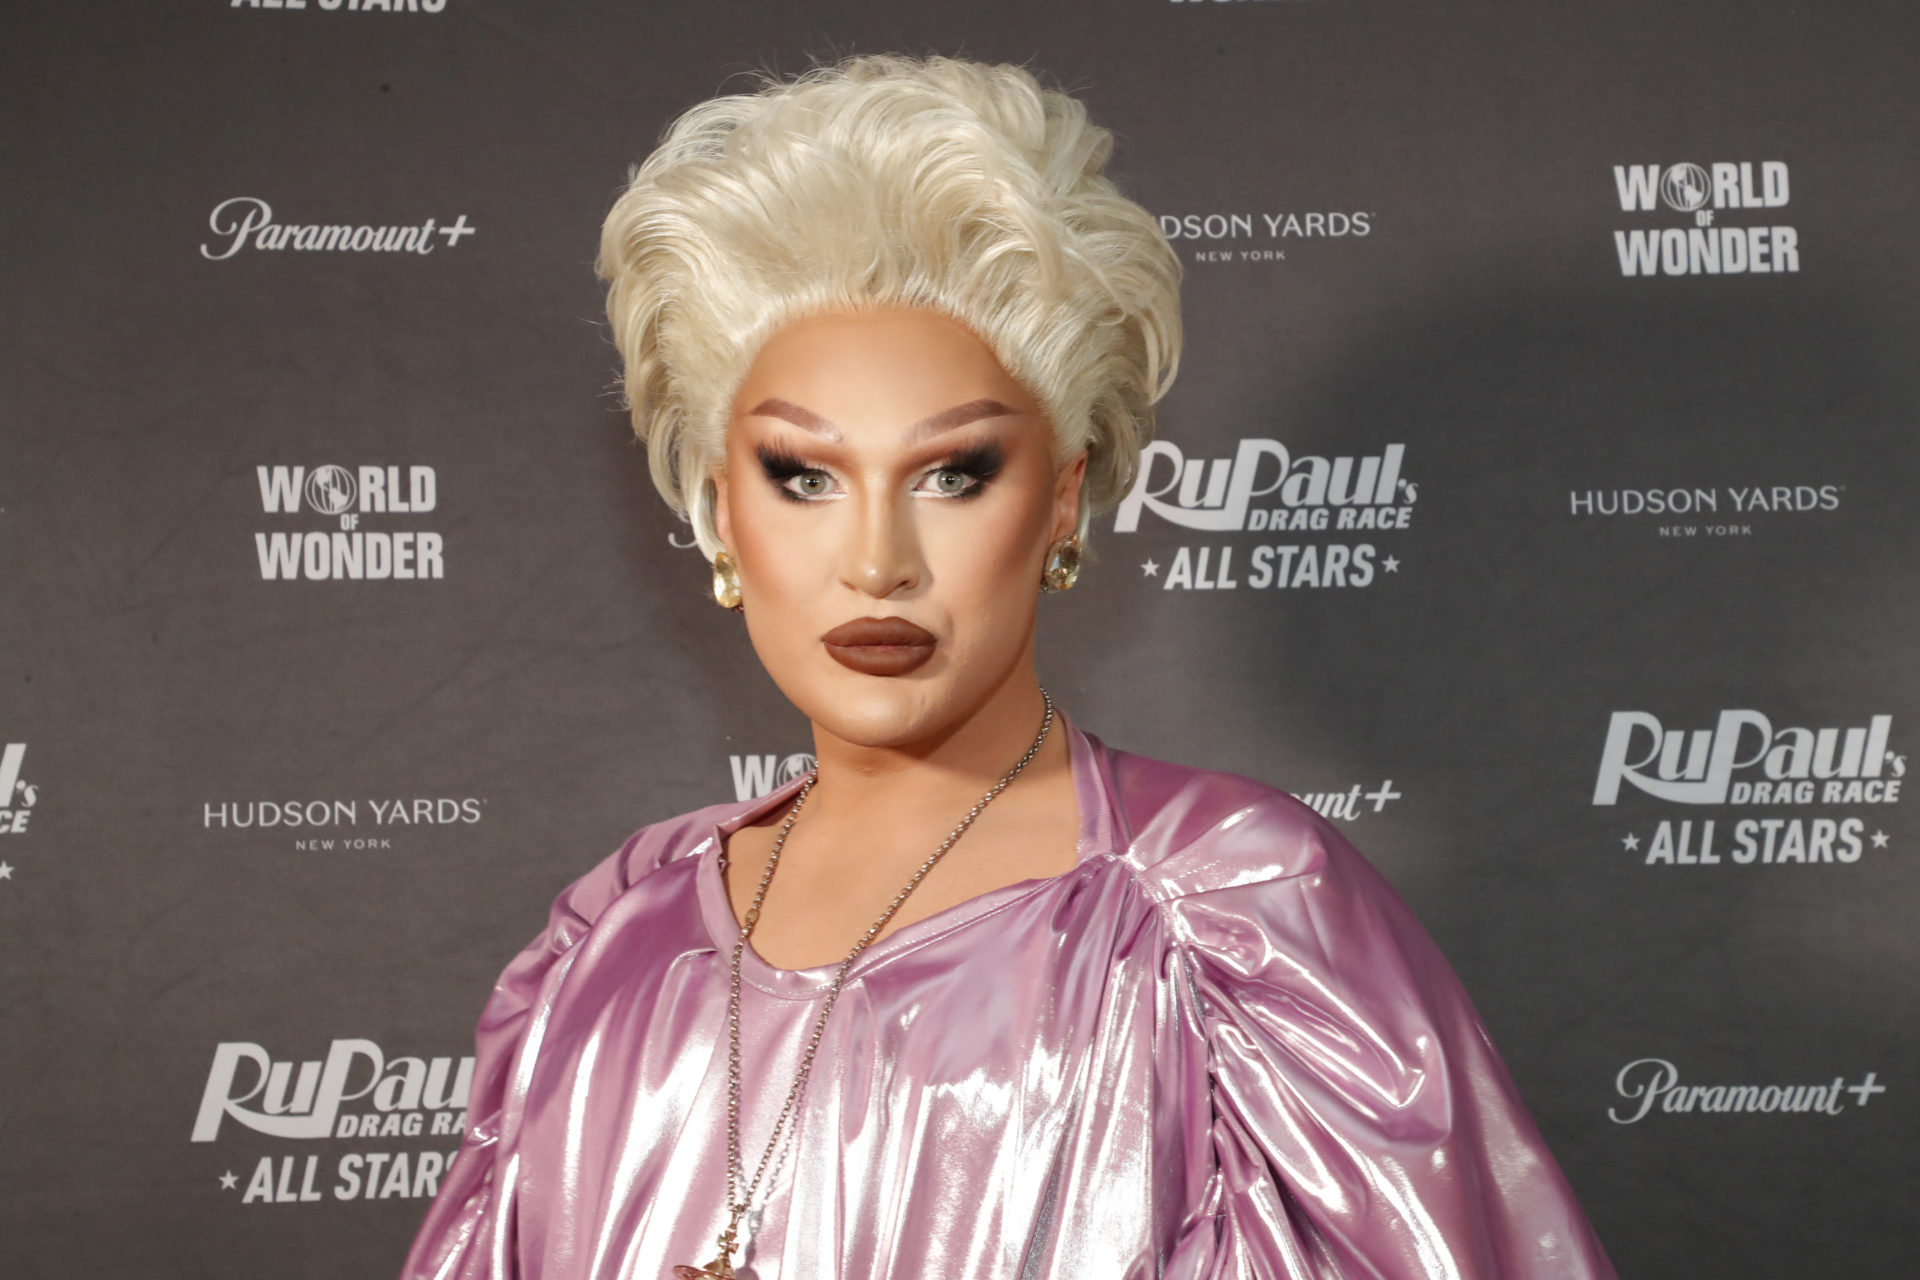 RuPaul's Drag Race All Stars 7 Premiere Screening + Panel Discussion St Hudson Yards, Public Square & Gardens